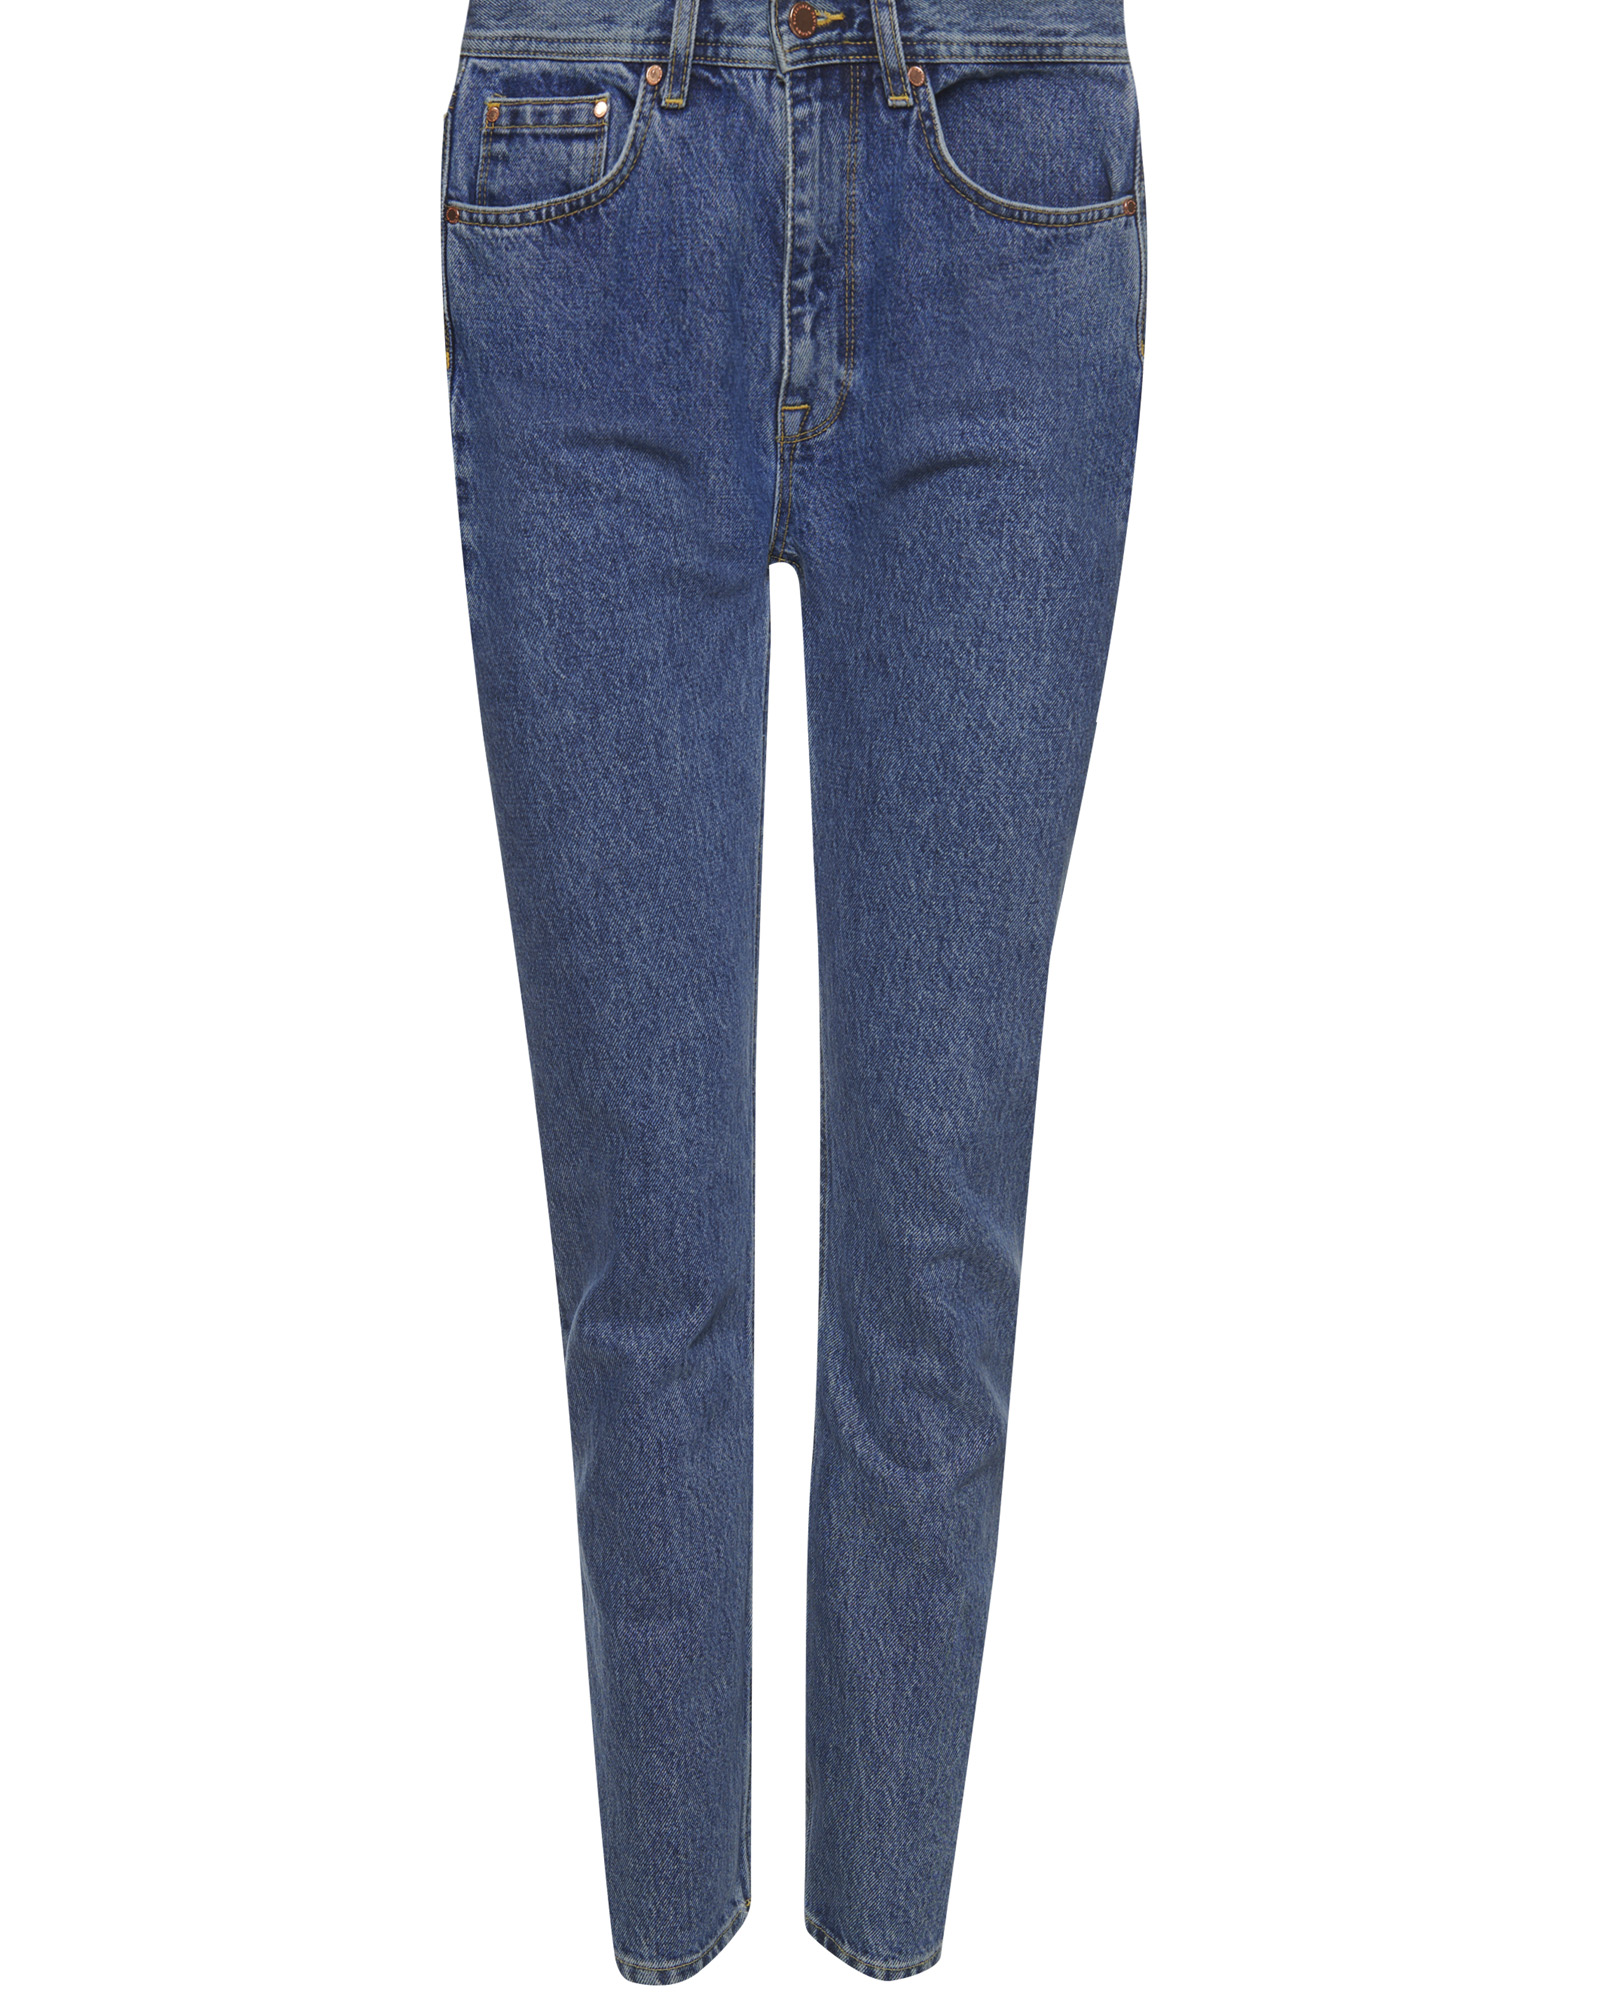 Superdry Womens High Rise Straight Jeans | eBay